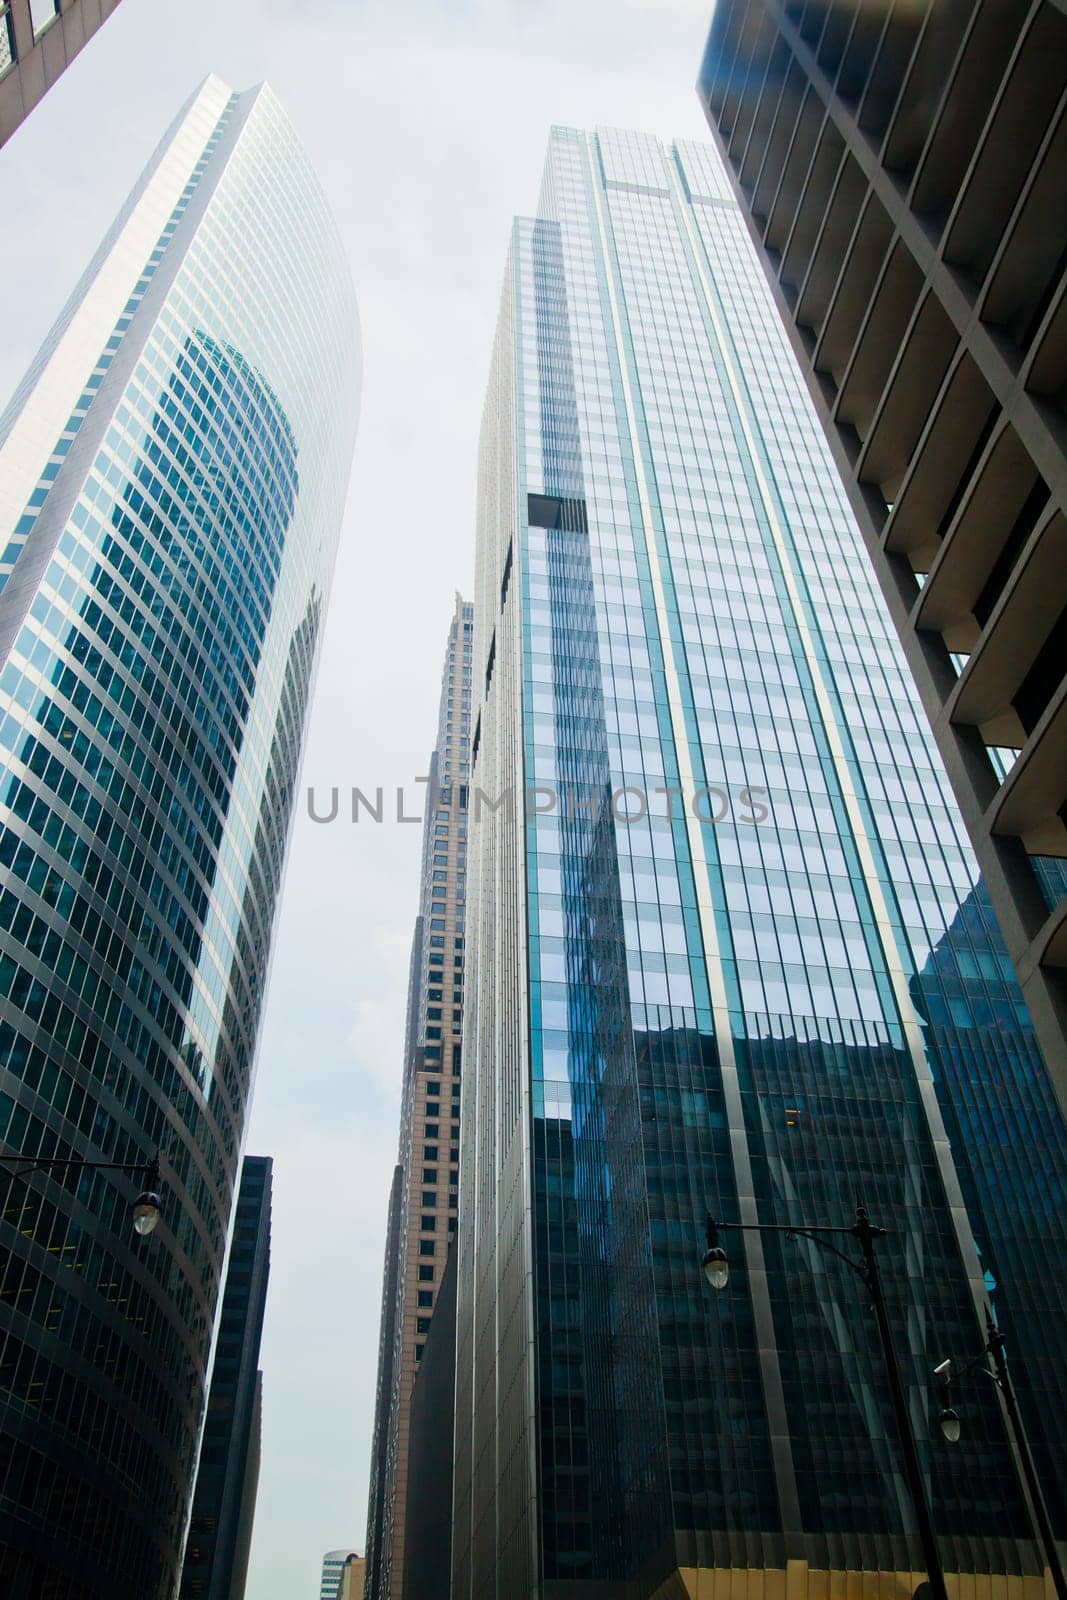 Upward View of Reflective Skyscrapers in Chicagos Business District by njproductions